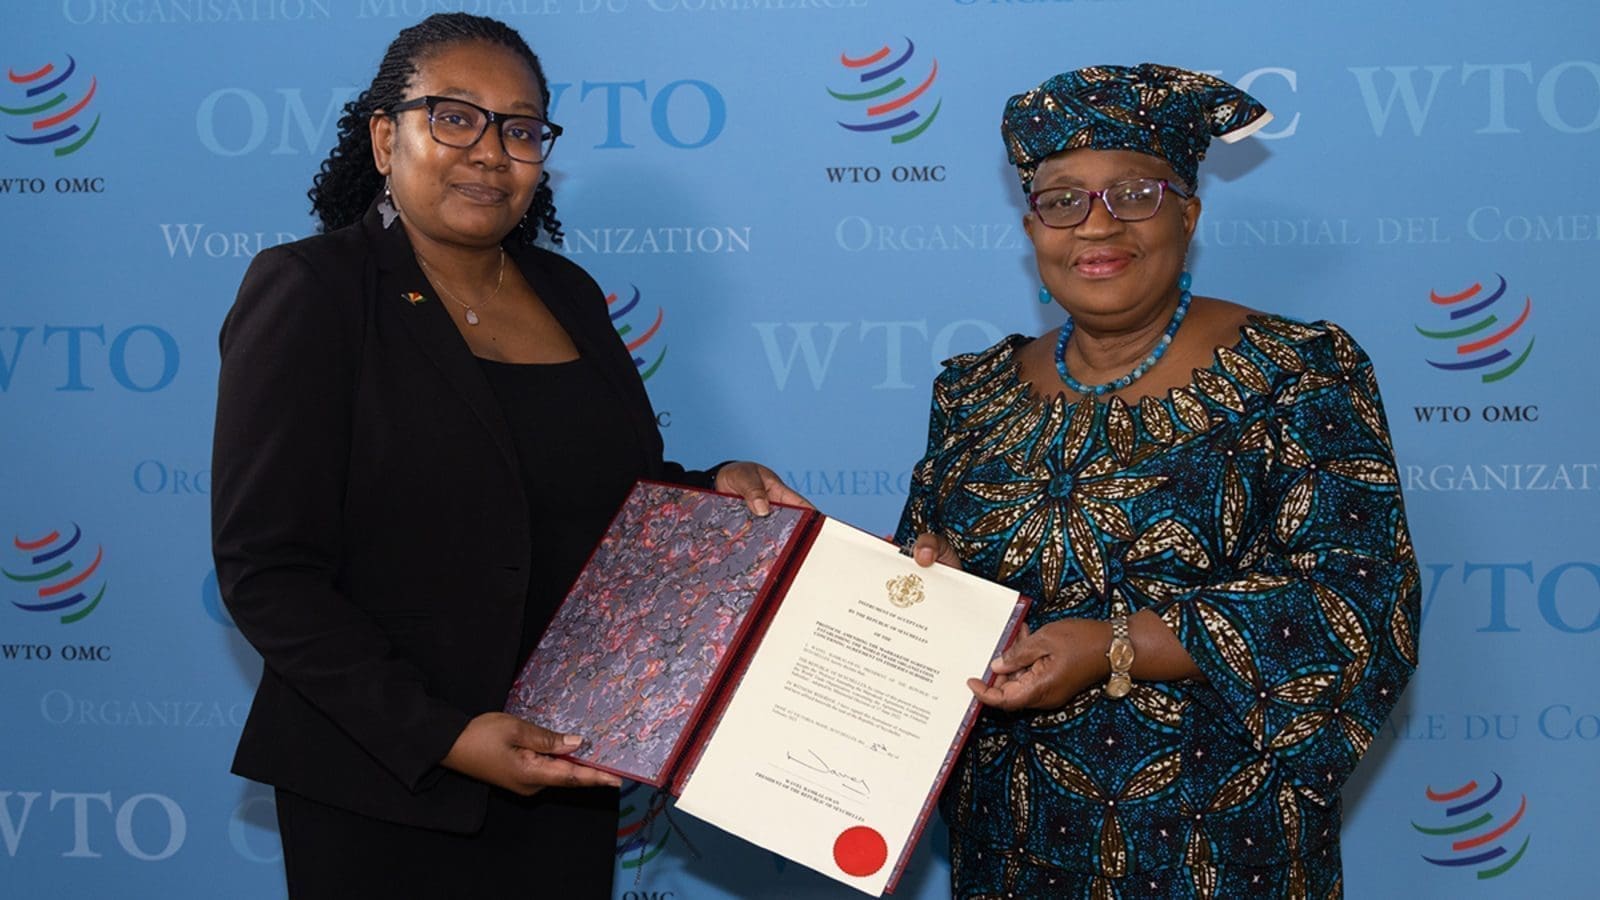 Seychelles becomes first African WTO member to formally accept fishing subsidies agreement